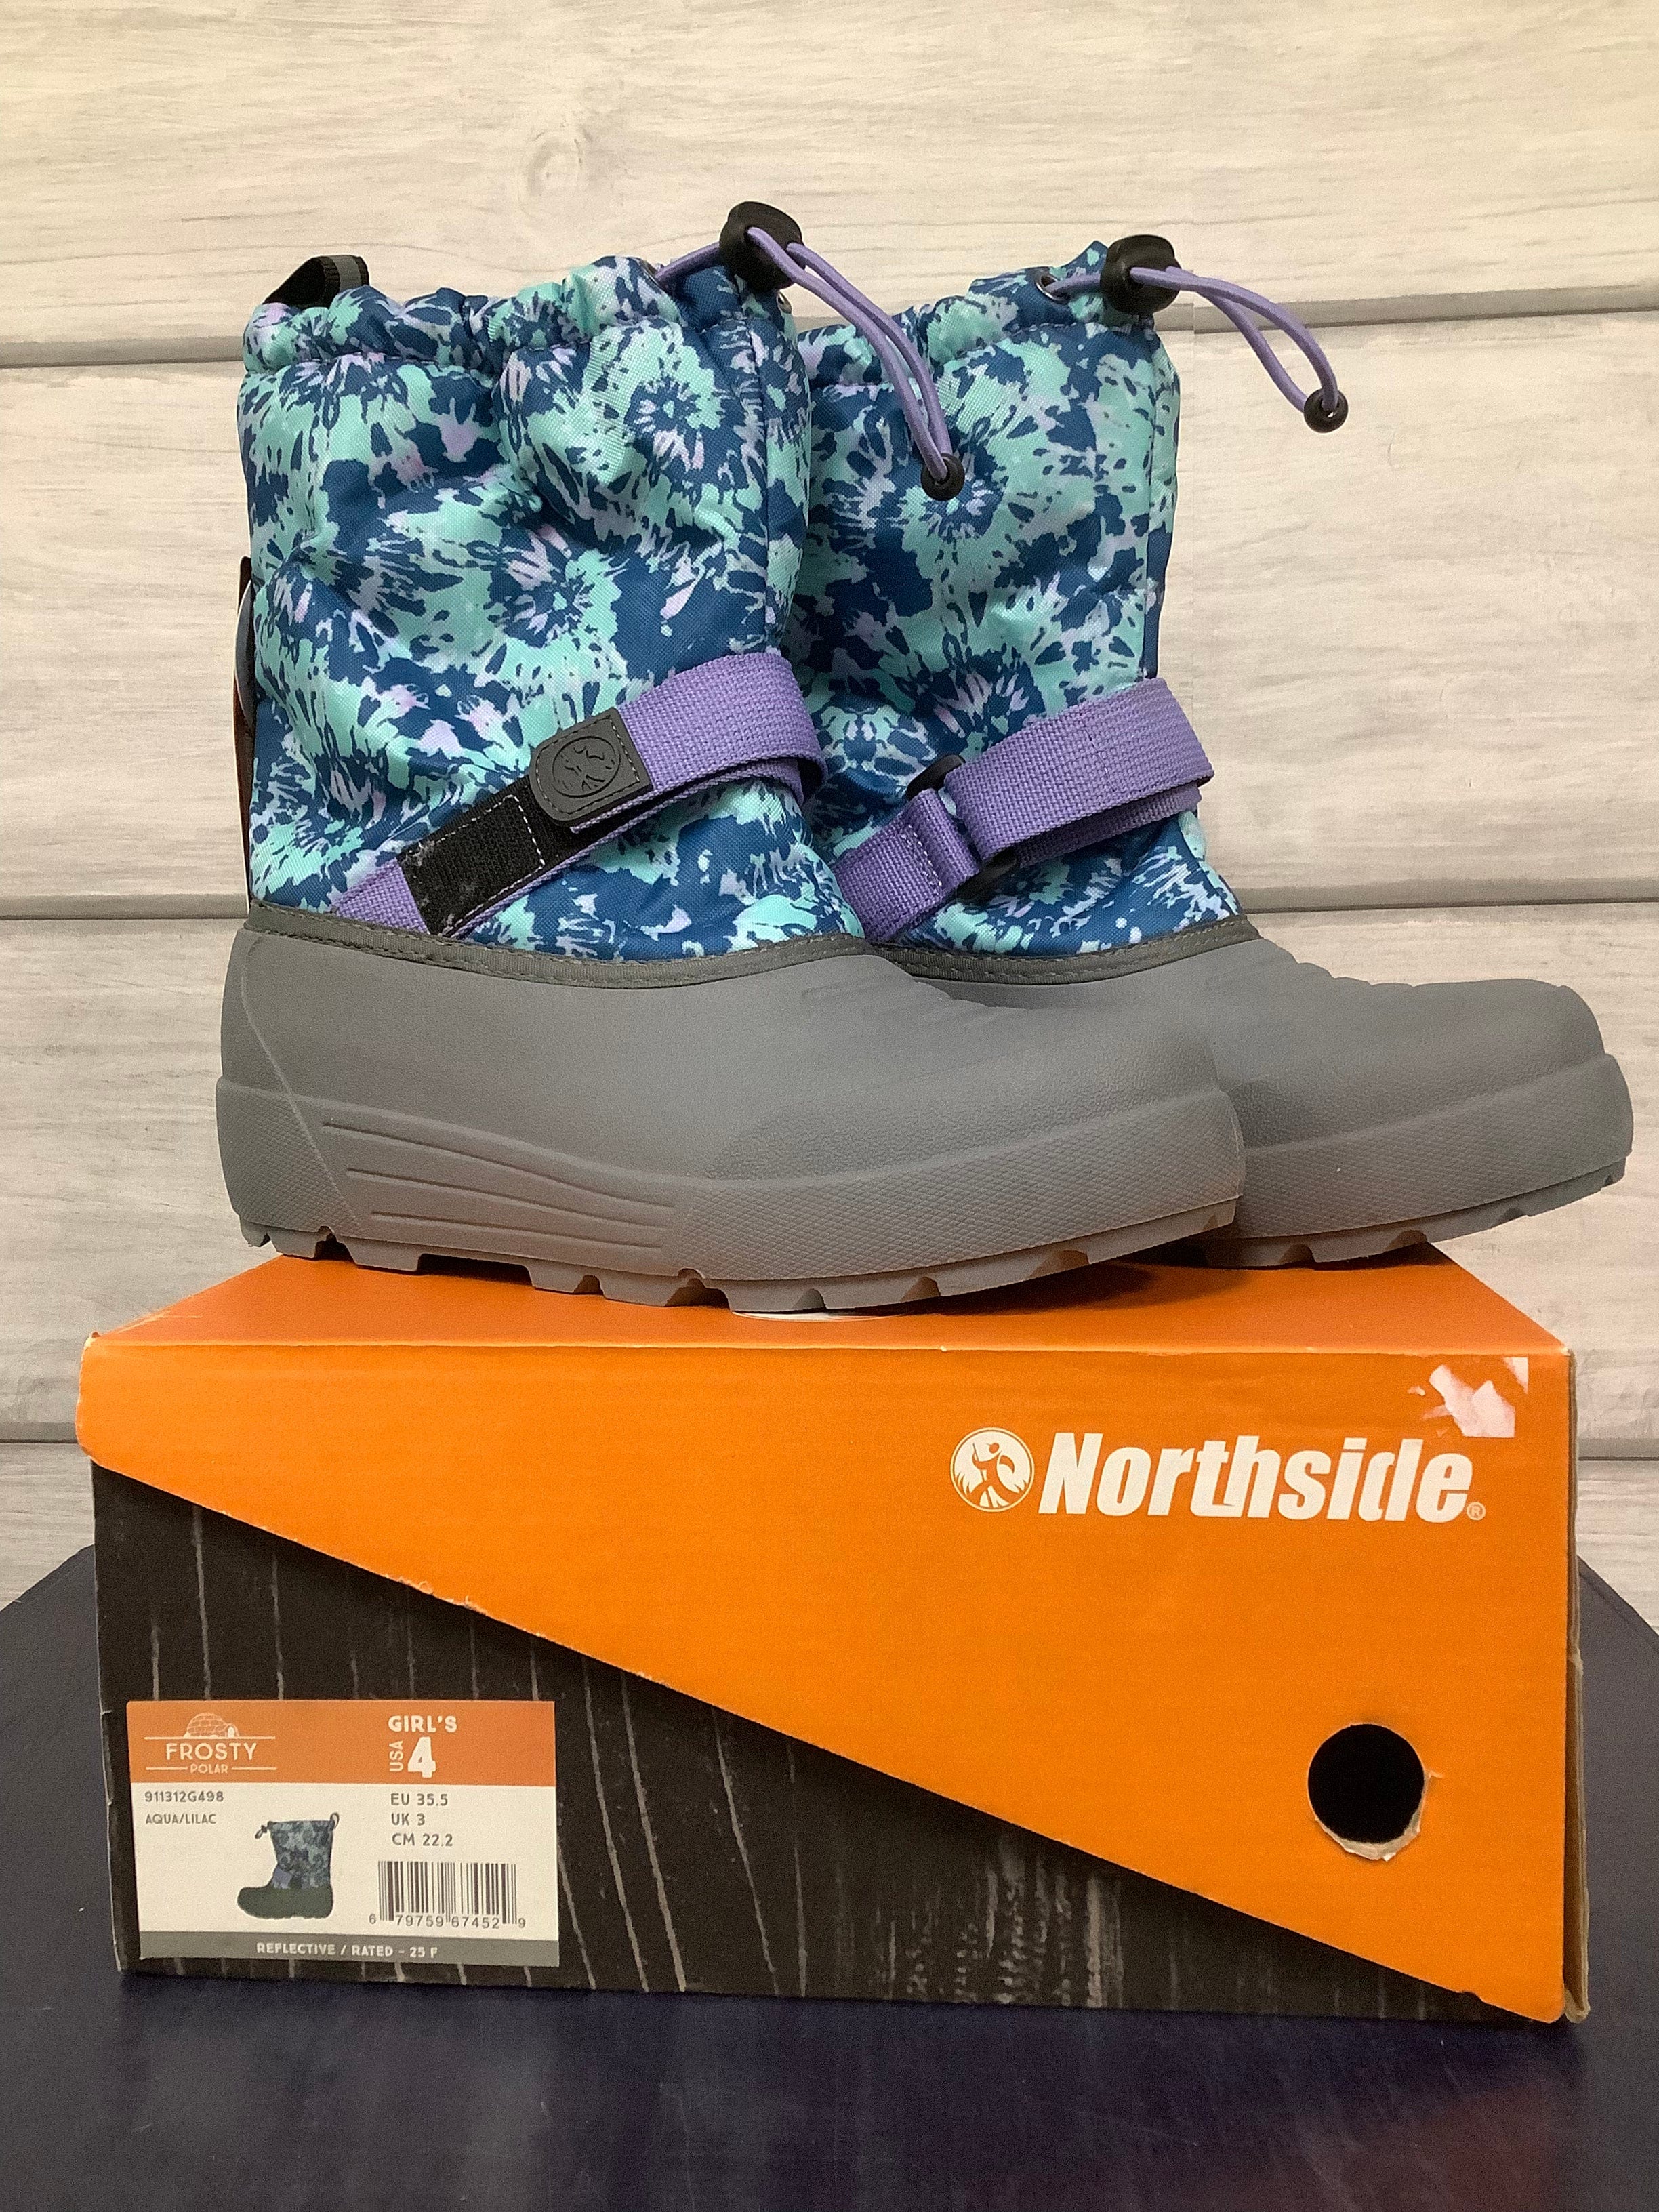 Minnows Childhood Goods Northside Winter Boots with Box, Size 4 Youth, *IN-STORE PICKUP ONLY*